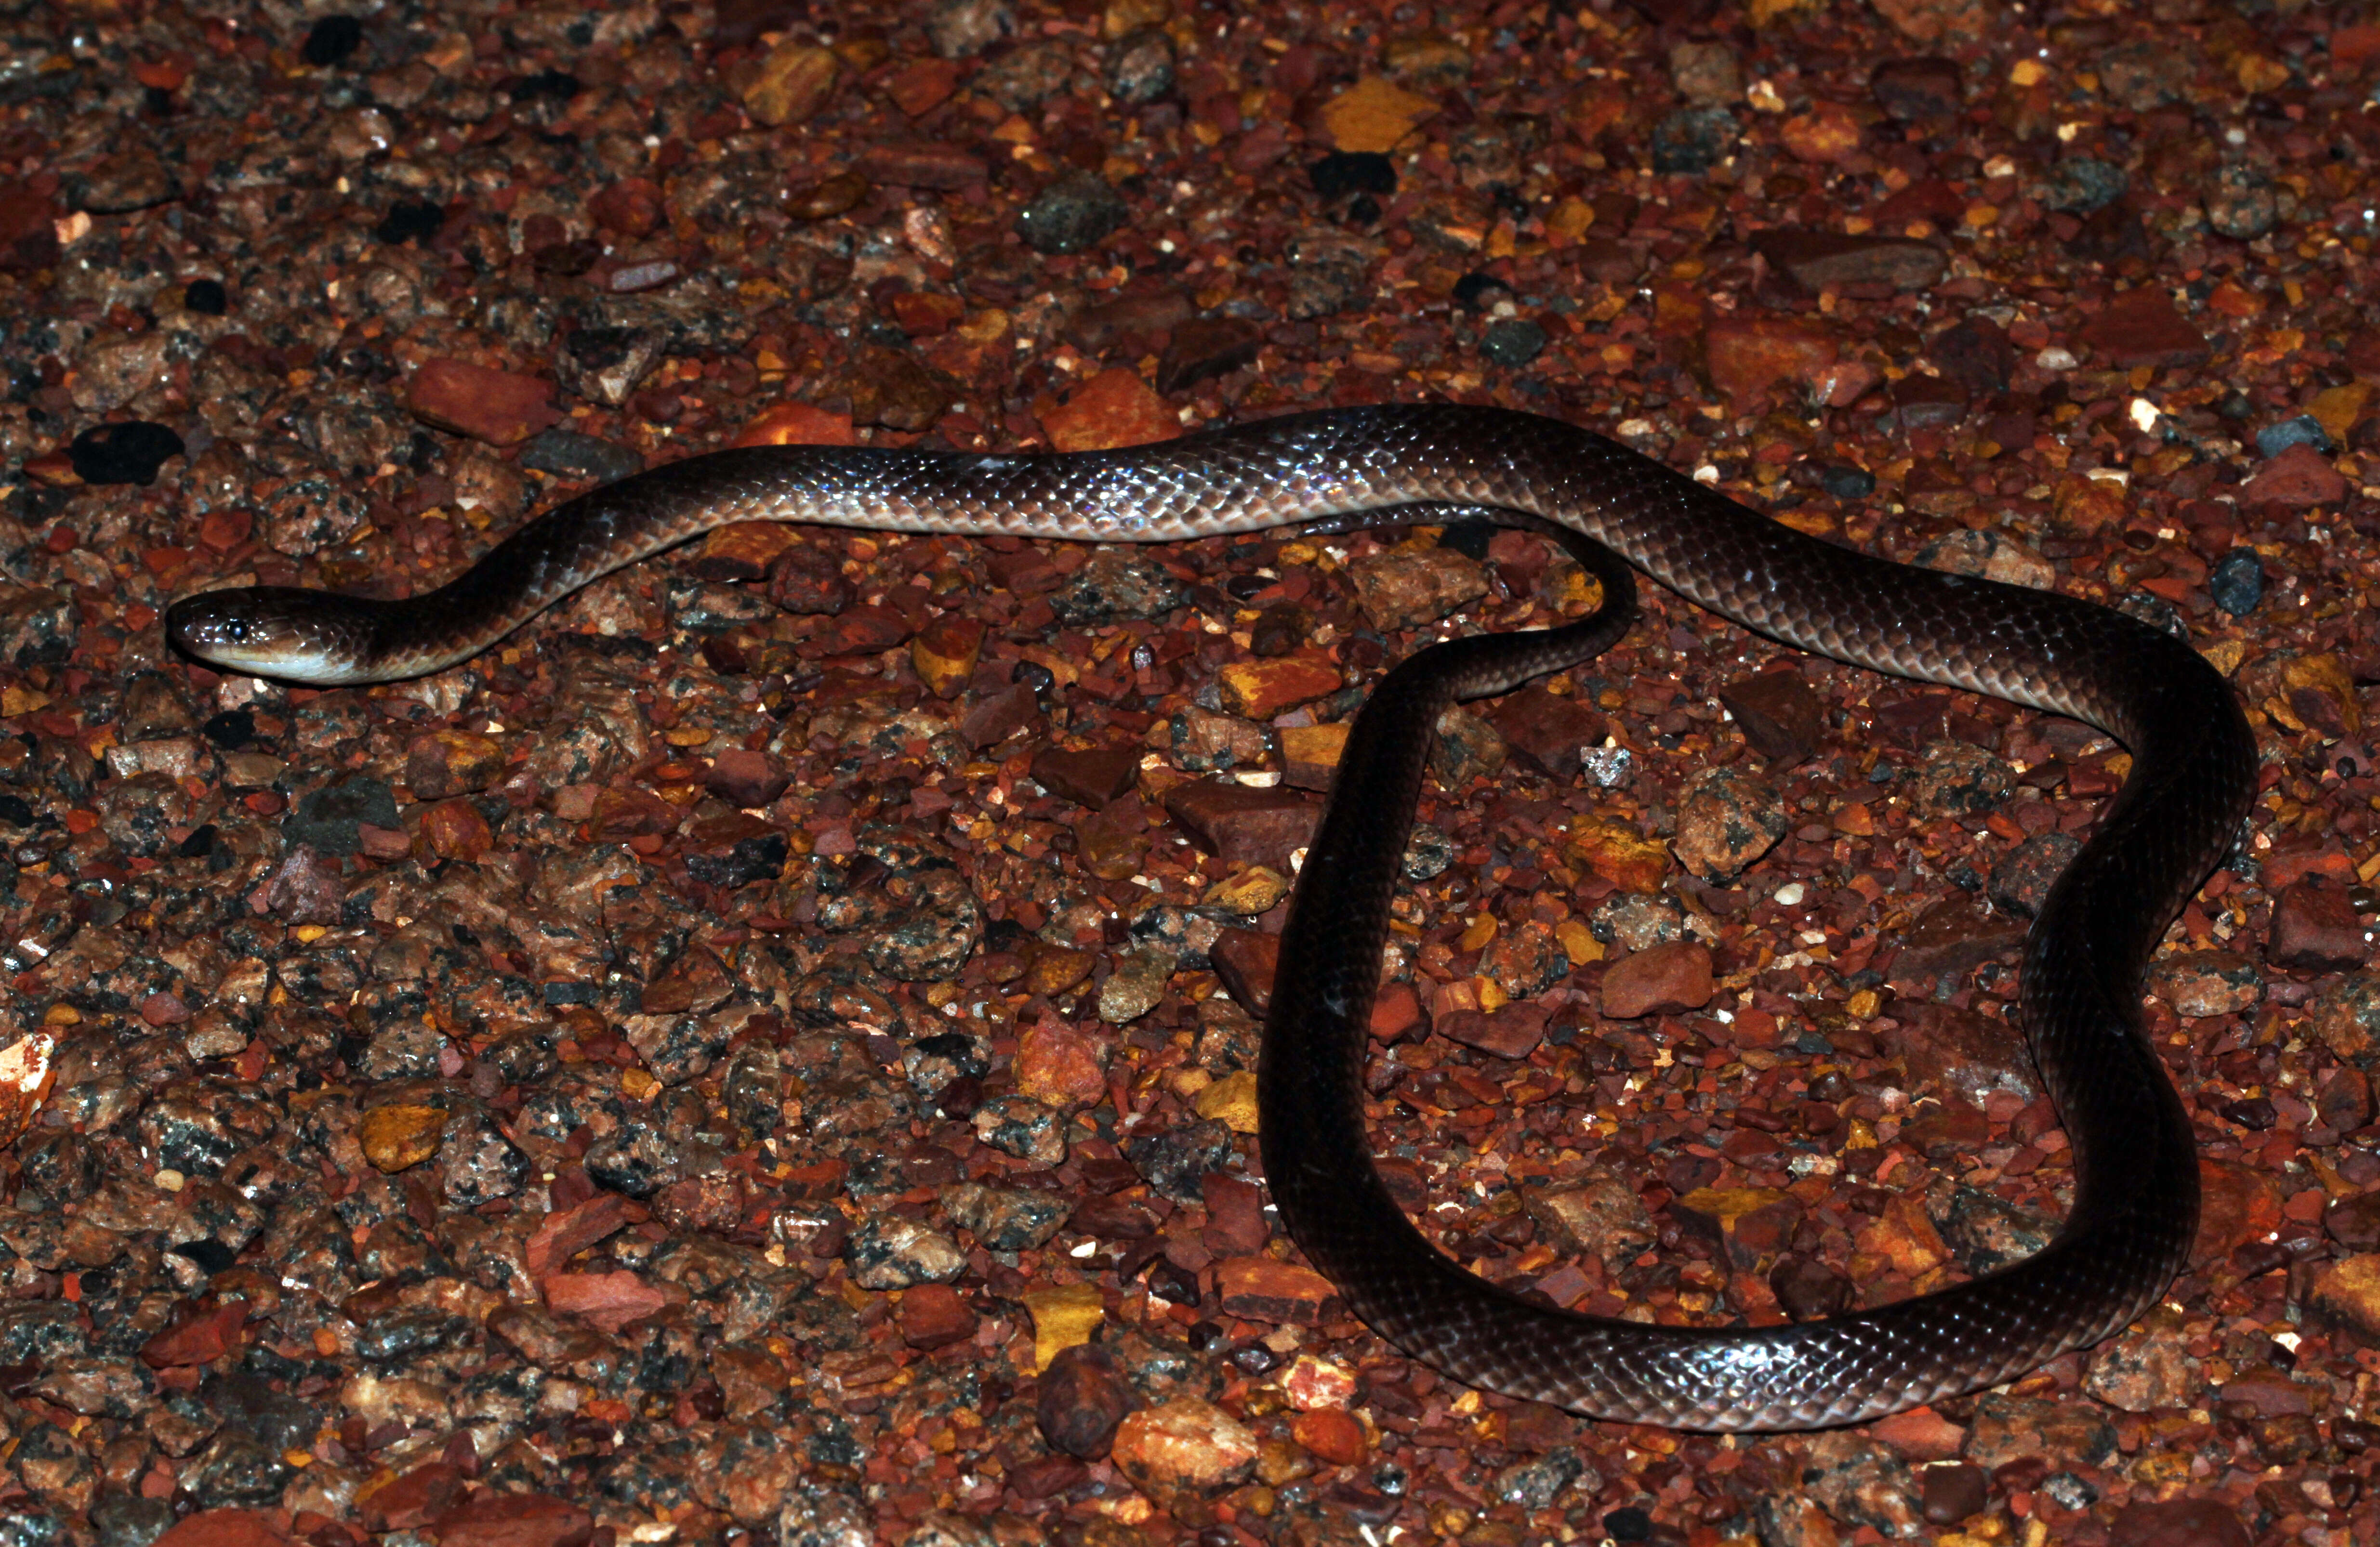 Image of Northern Small-eyed Snake